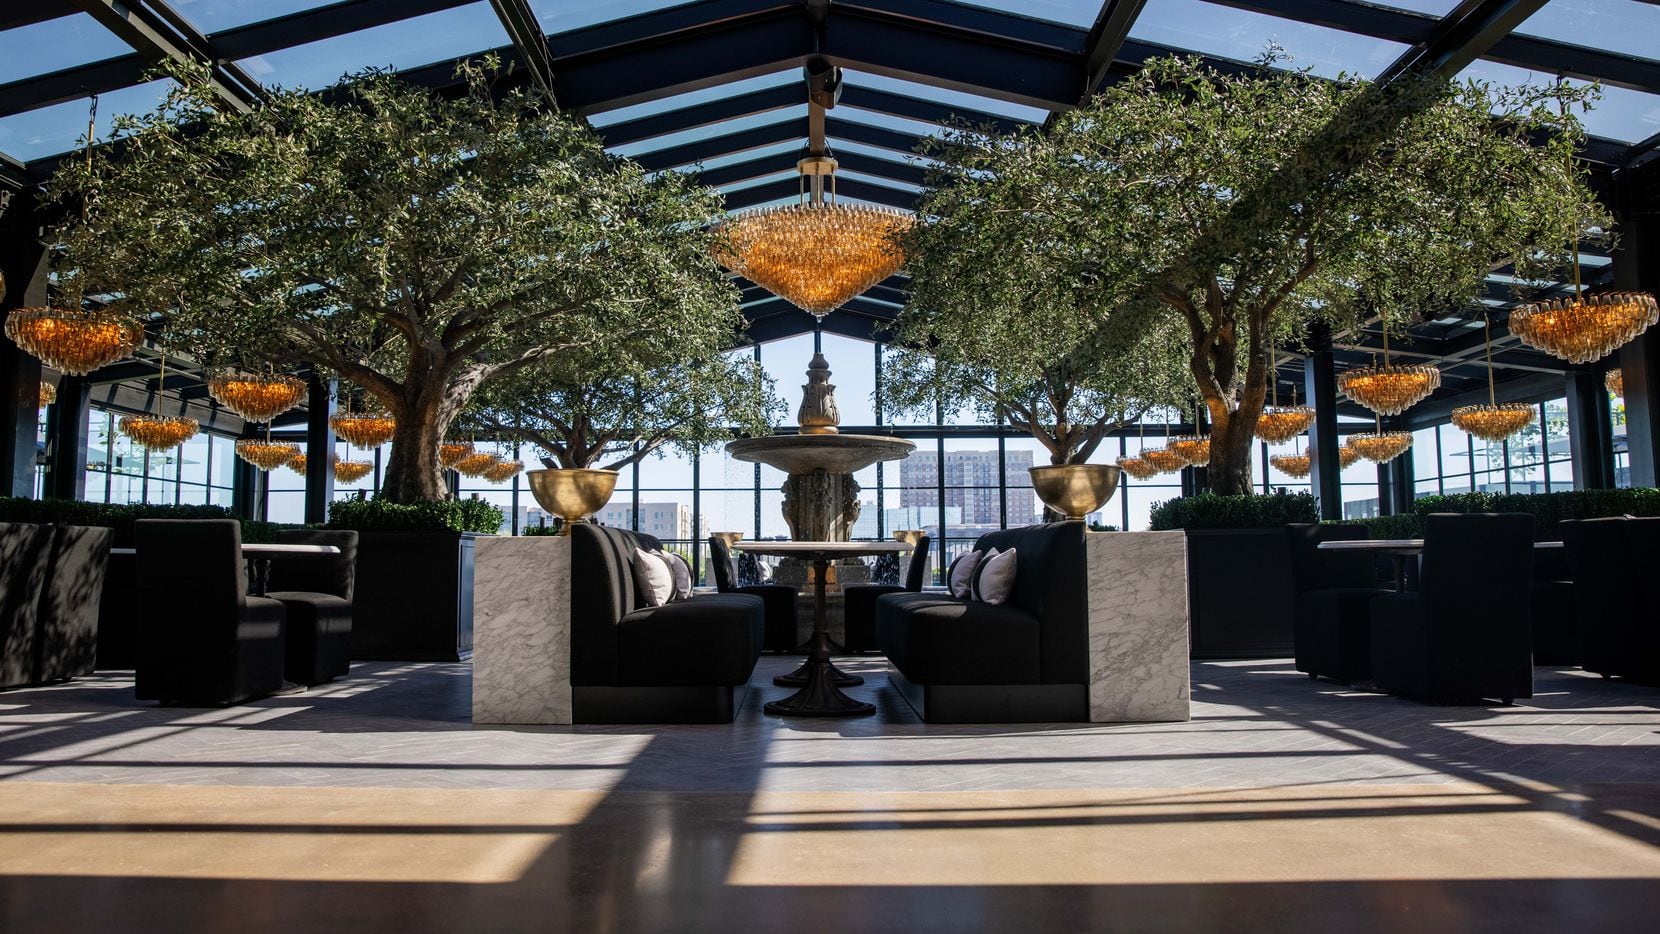 We're calling it: RH Rooftop Restaurant is the new hot spot for lunch or brunch in Dallas.